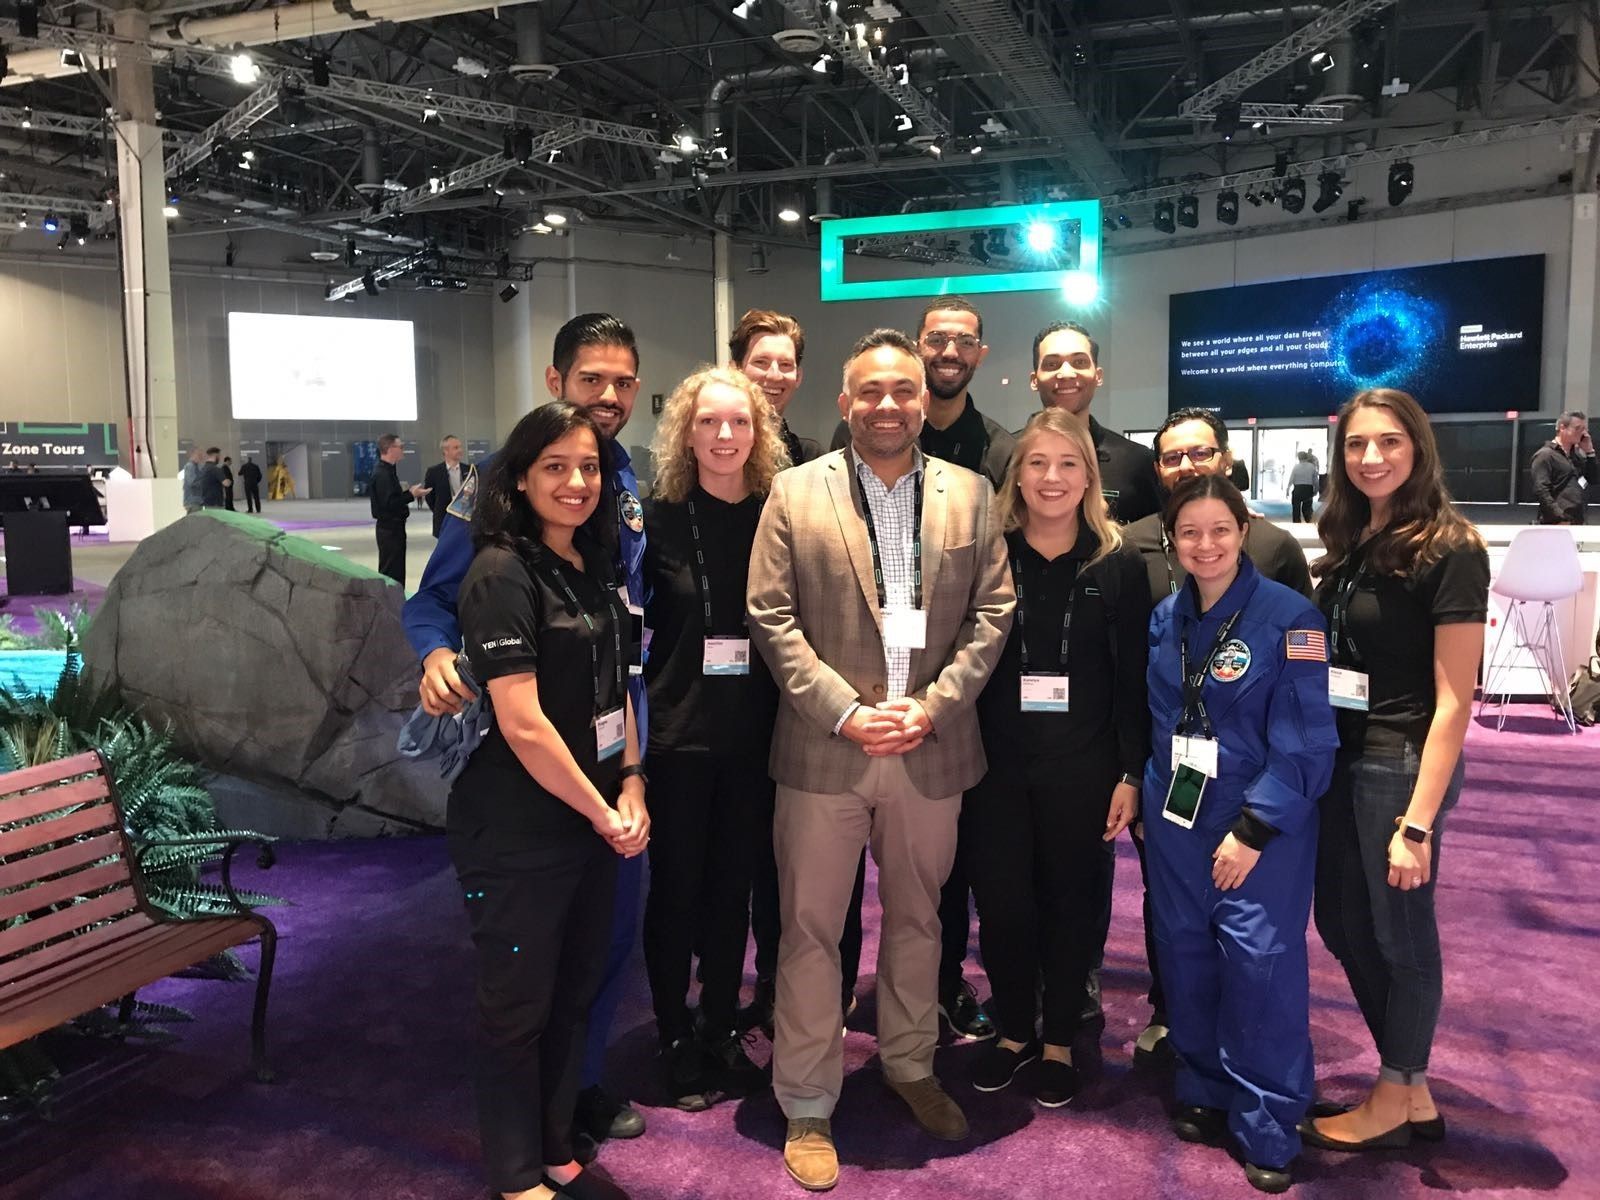 HPE YEN Ambassadors with Adrian Stevens, HPE Vice President, Learning & Development at the Mission to Mars display